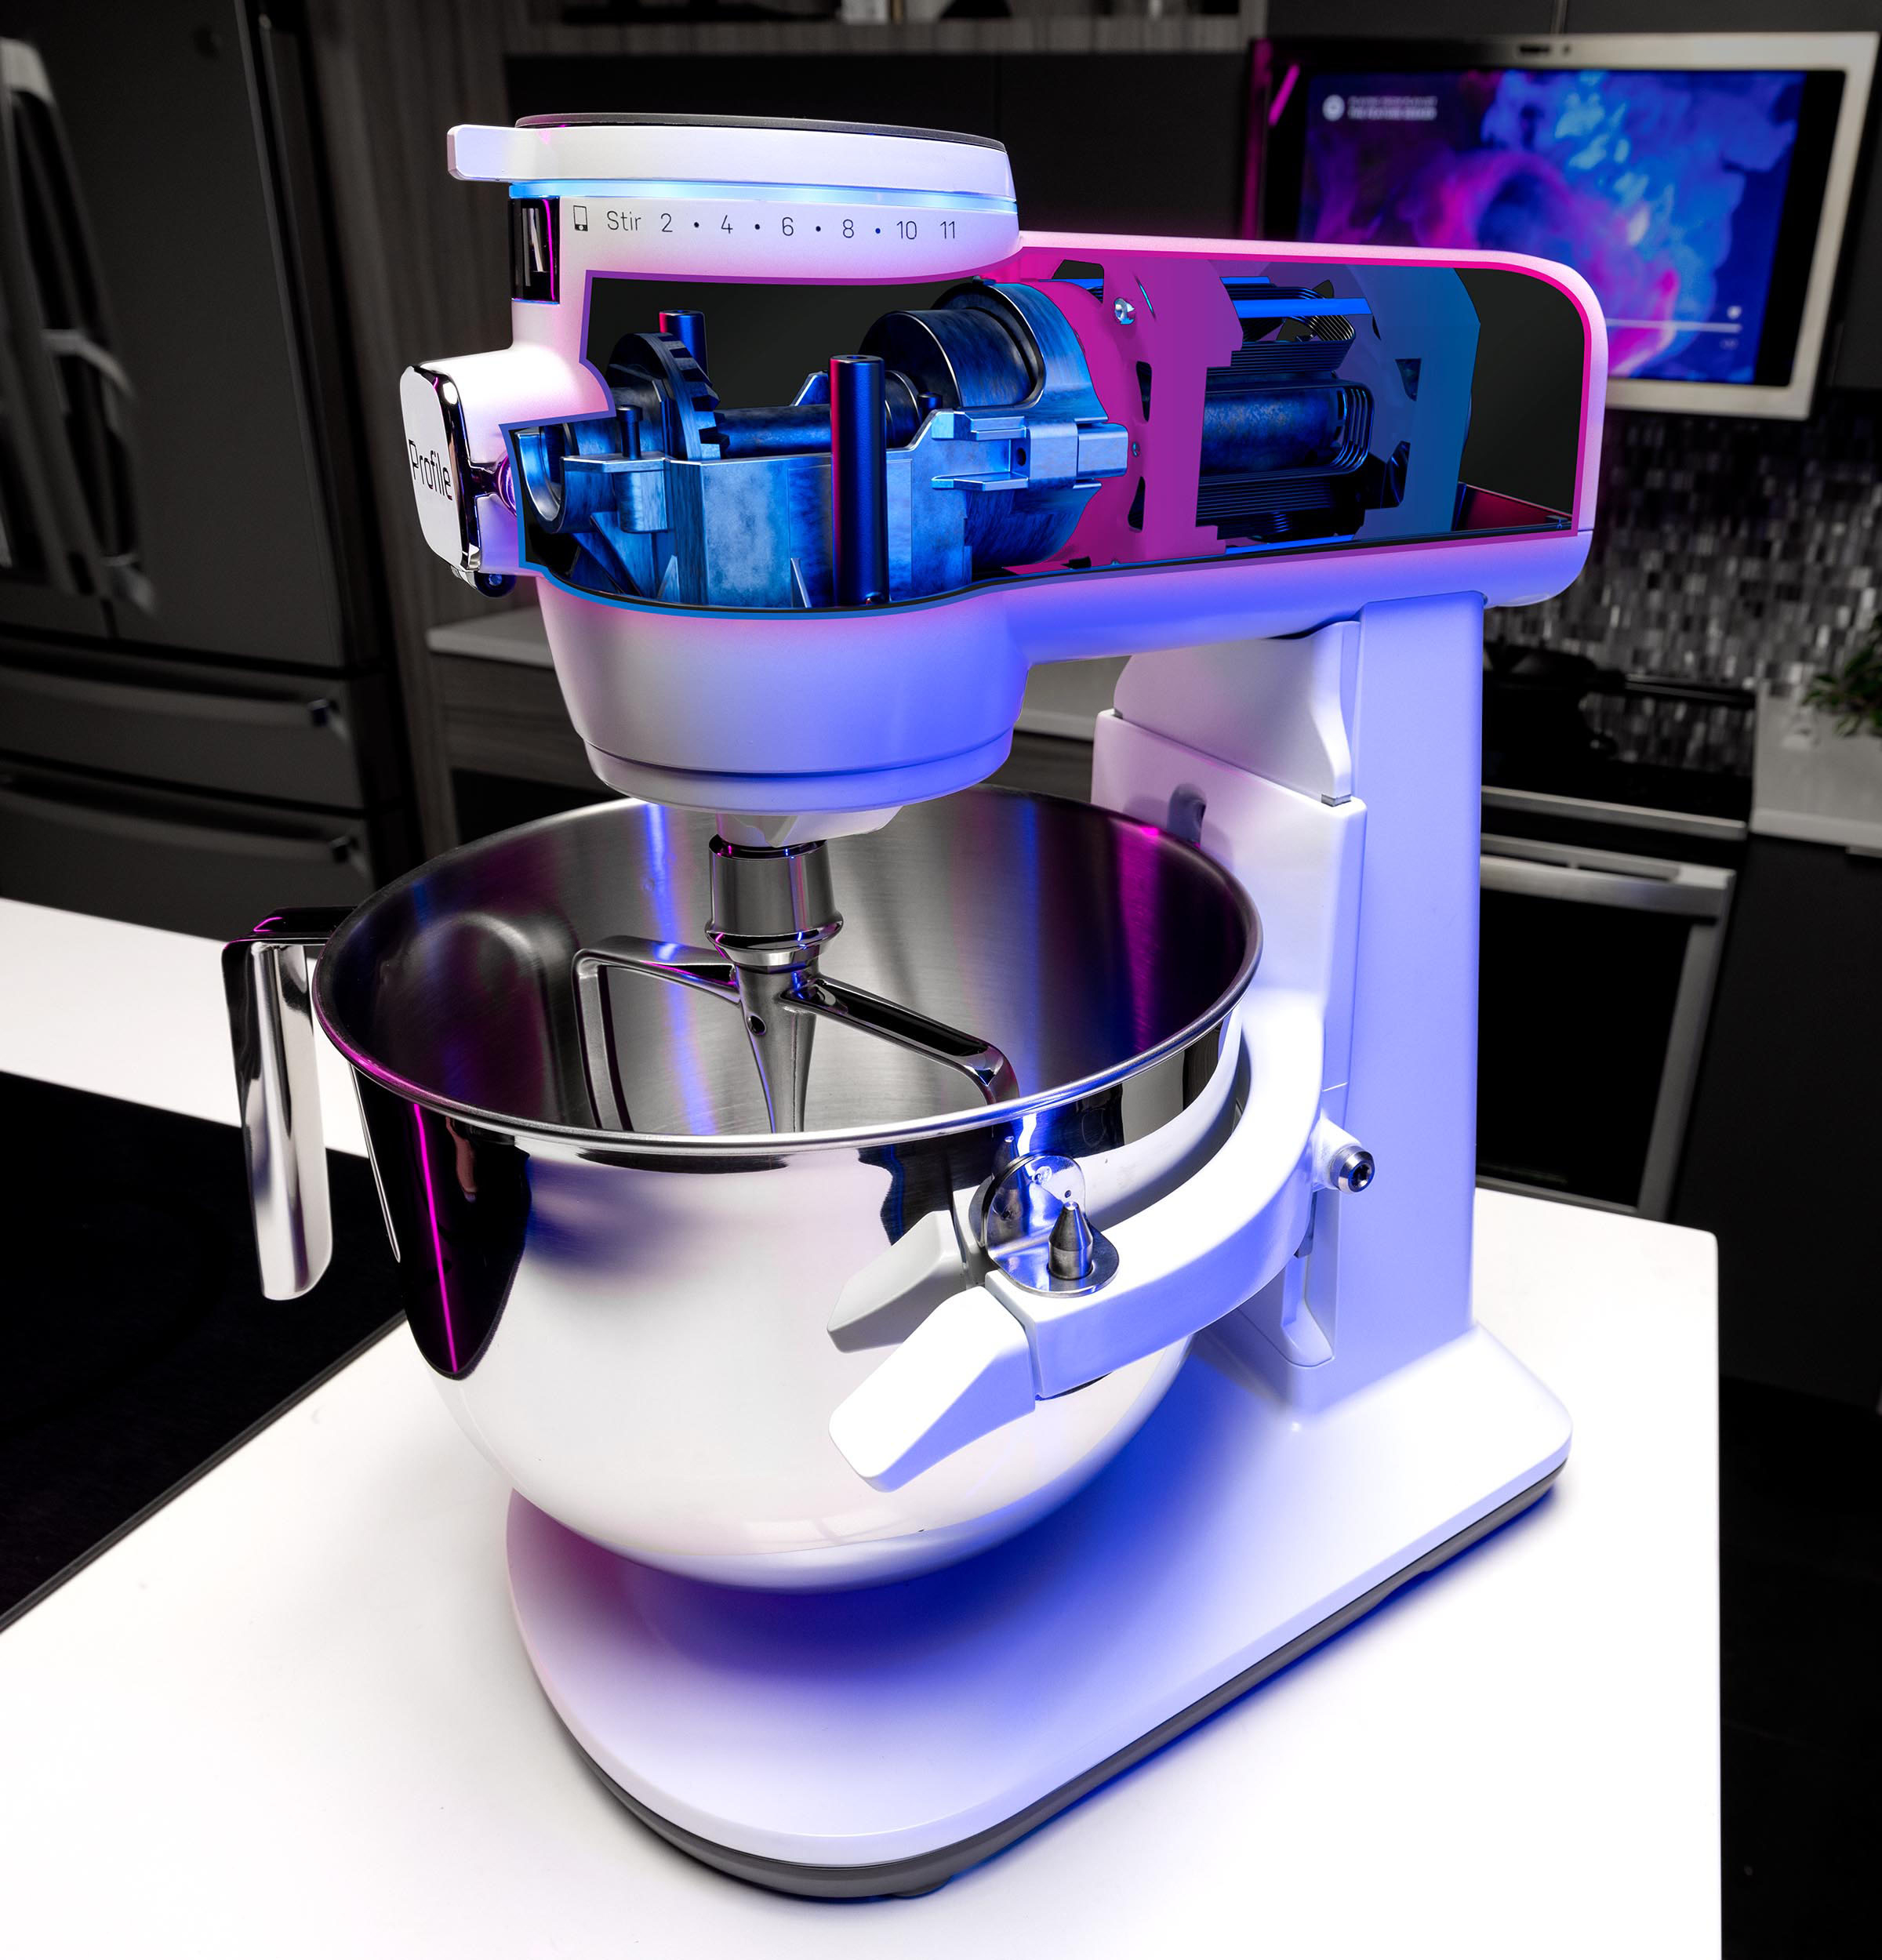 The GE Profile Smart Mixer with Auto Sense and built-in smart